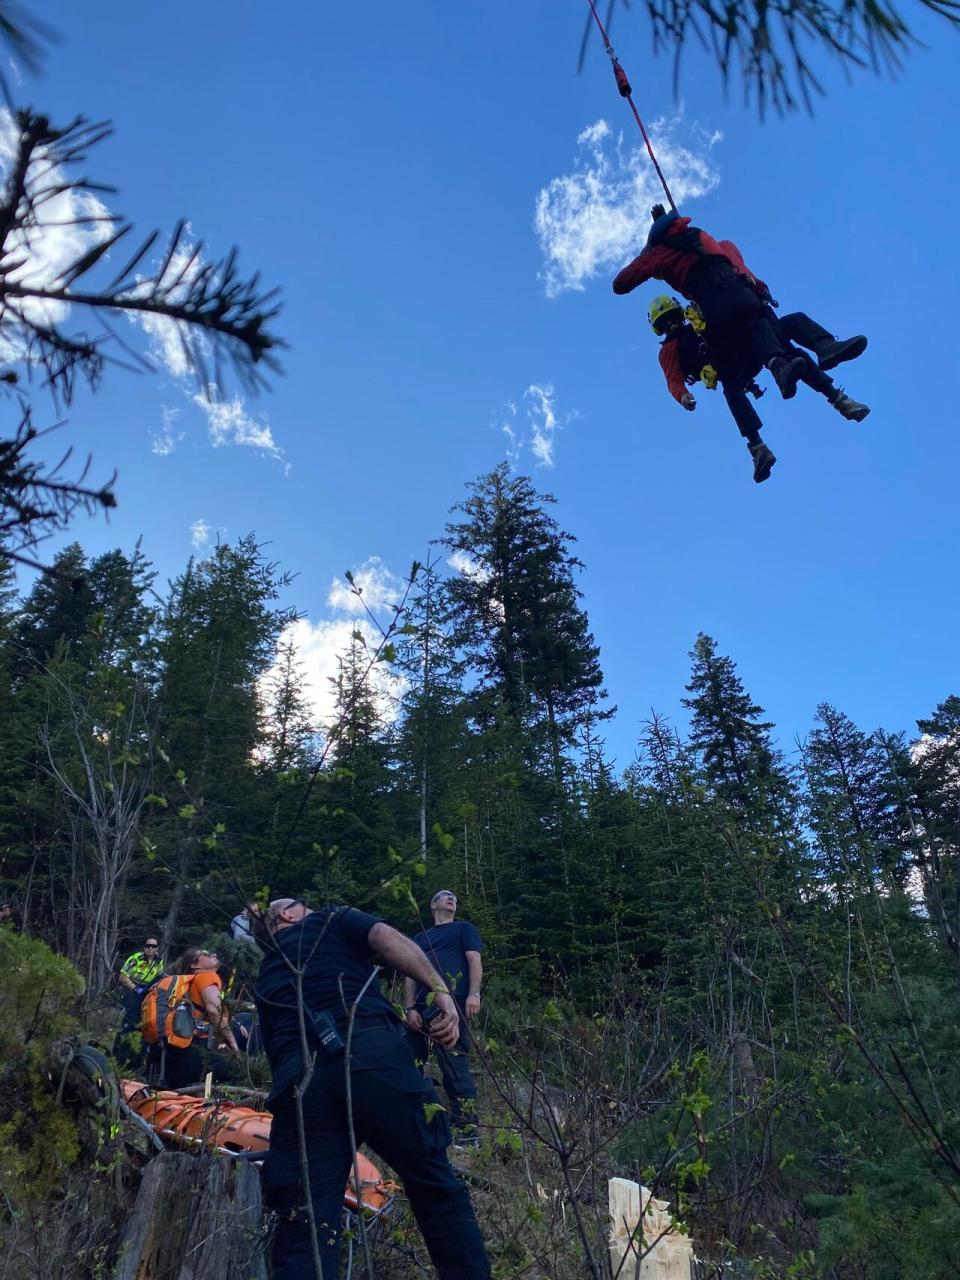 Members of Elkford, Sparwood and Fernie Search and Rescue crews teamed up on Thursday to rescue a man attacked by a grizzly on a steep mountainside near the B.C.-Alberta border.